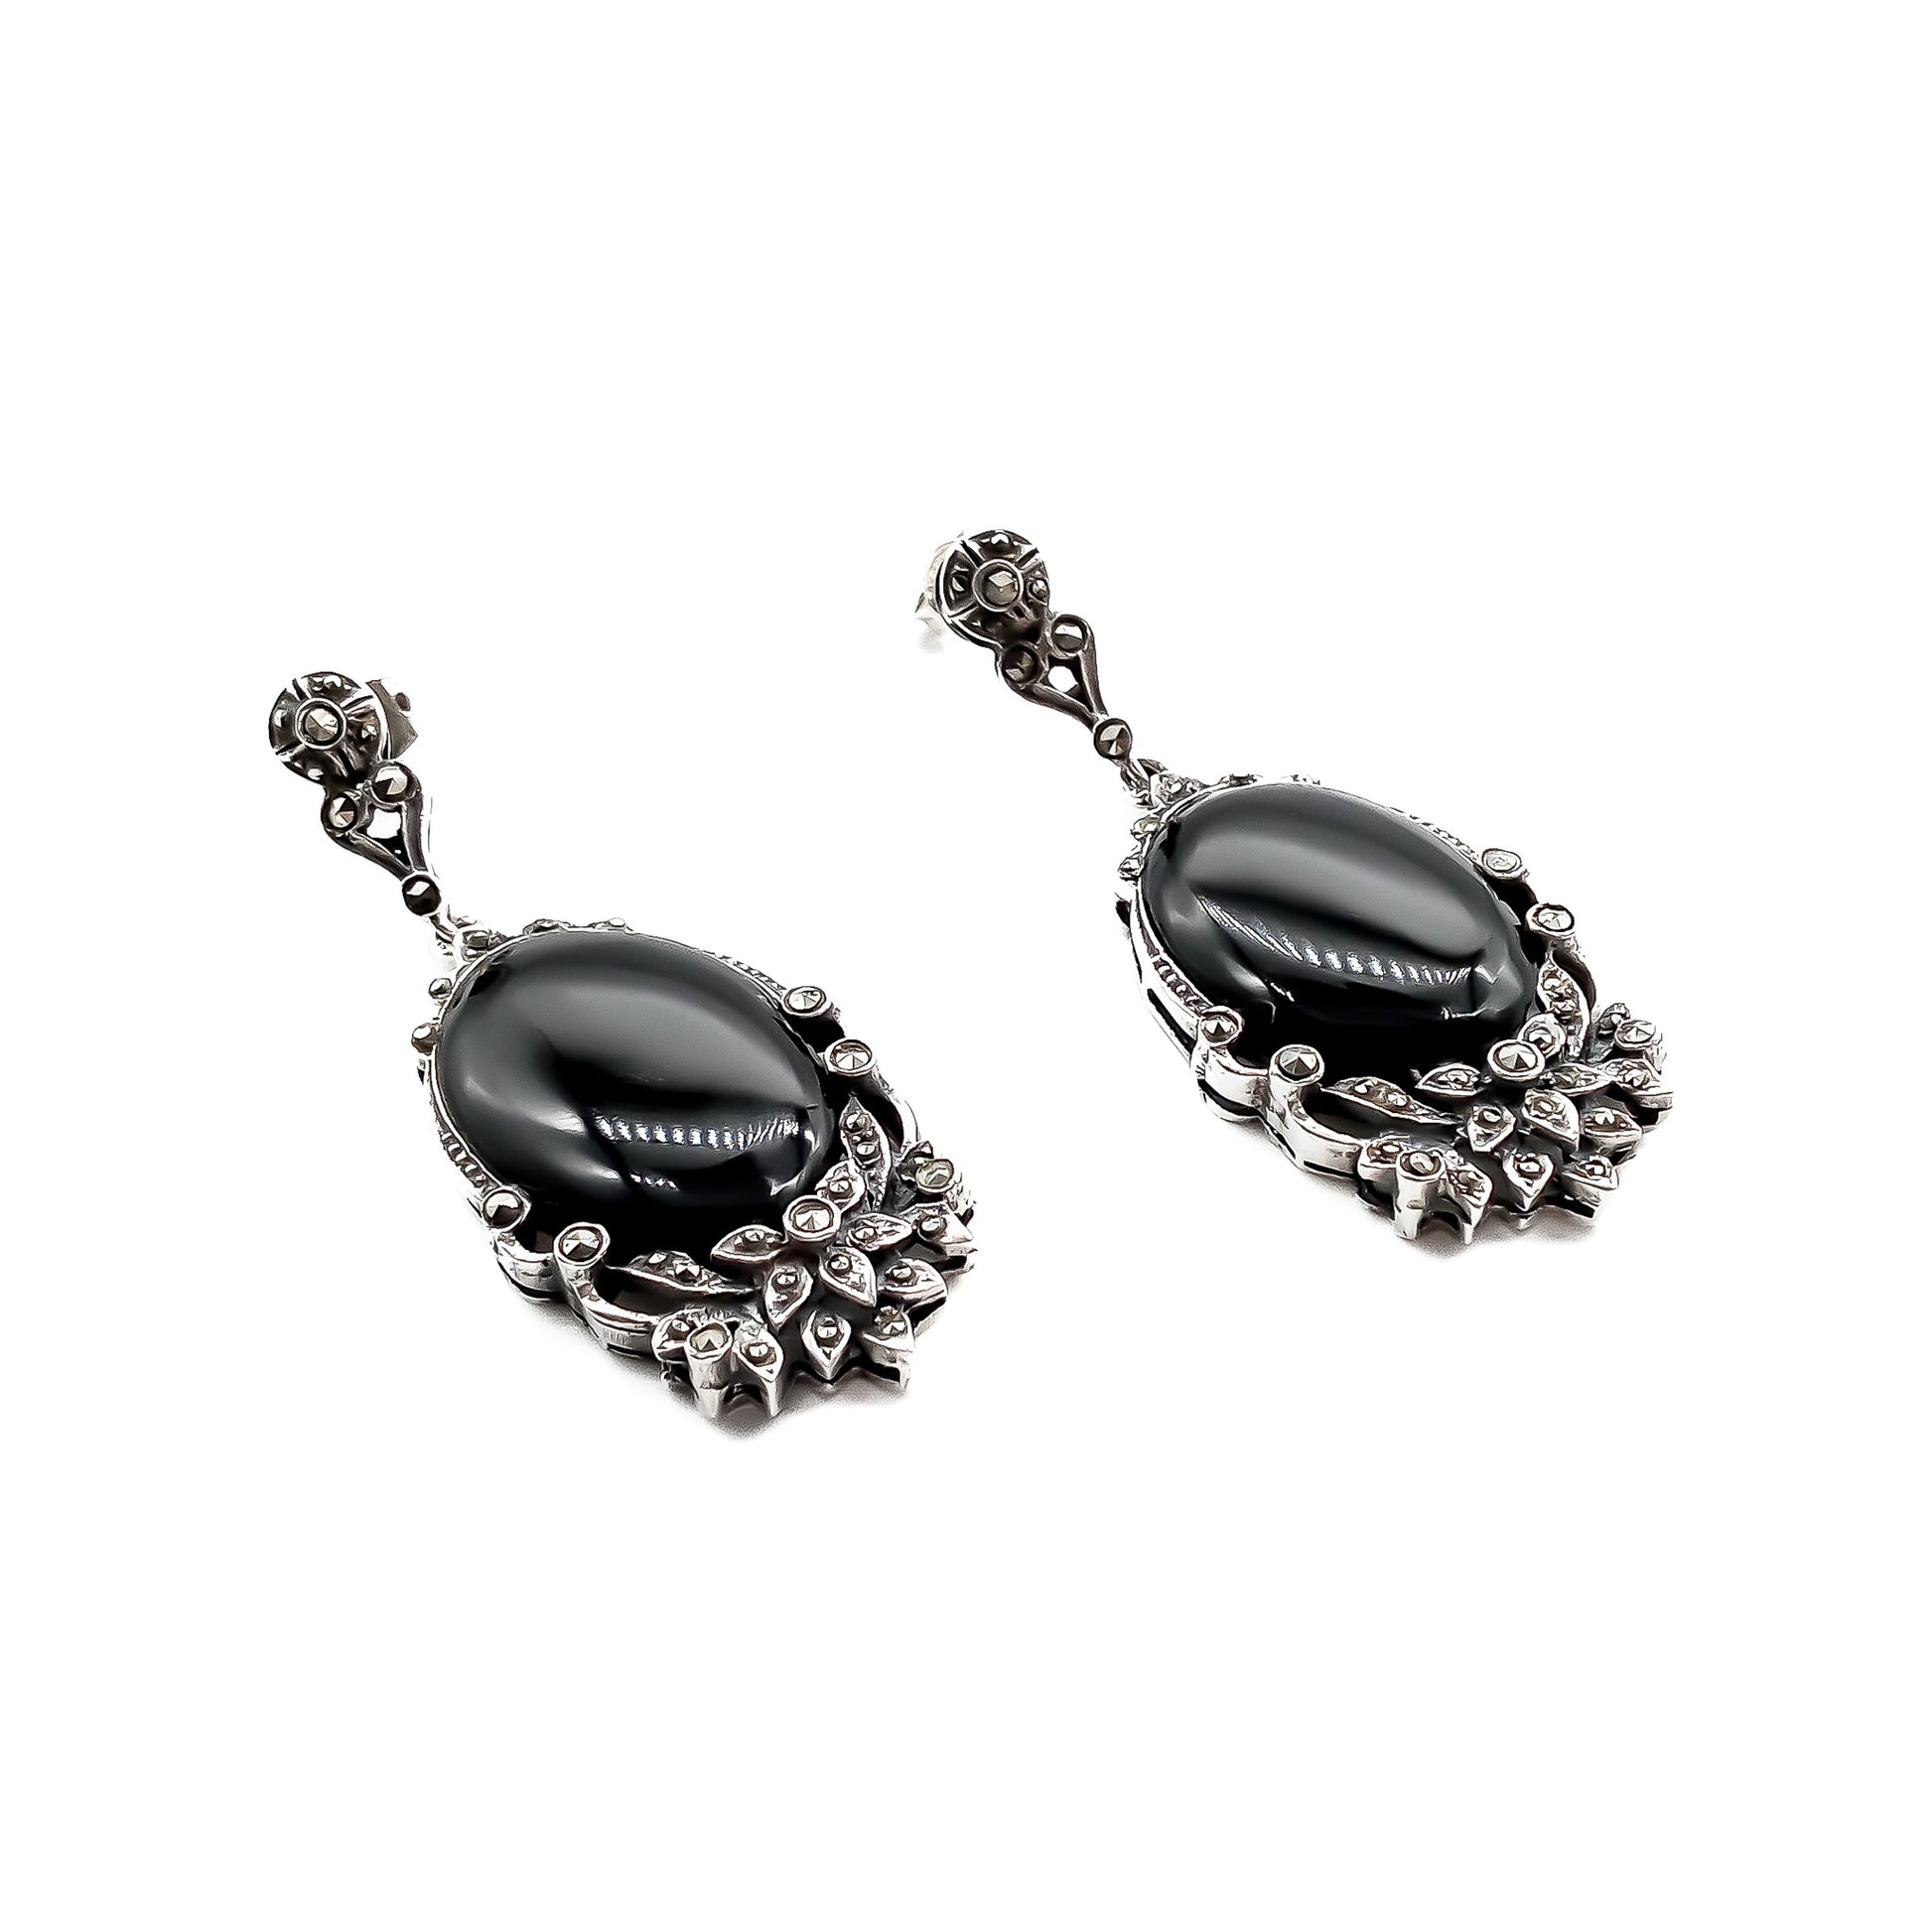 Stunning vintage silver drop earrings, each set with an oval onyx cabochon stone and marcasites in a floral design.